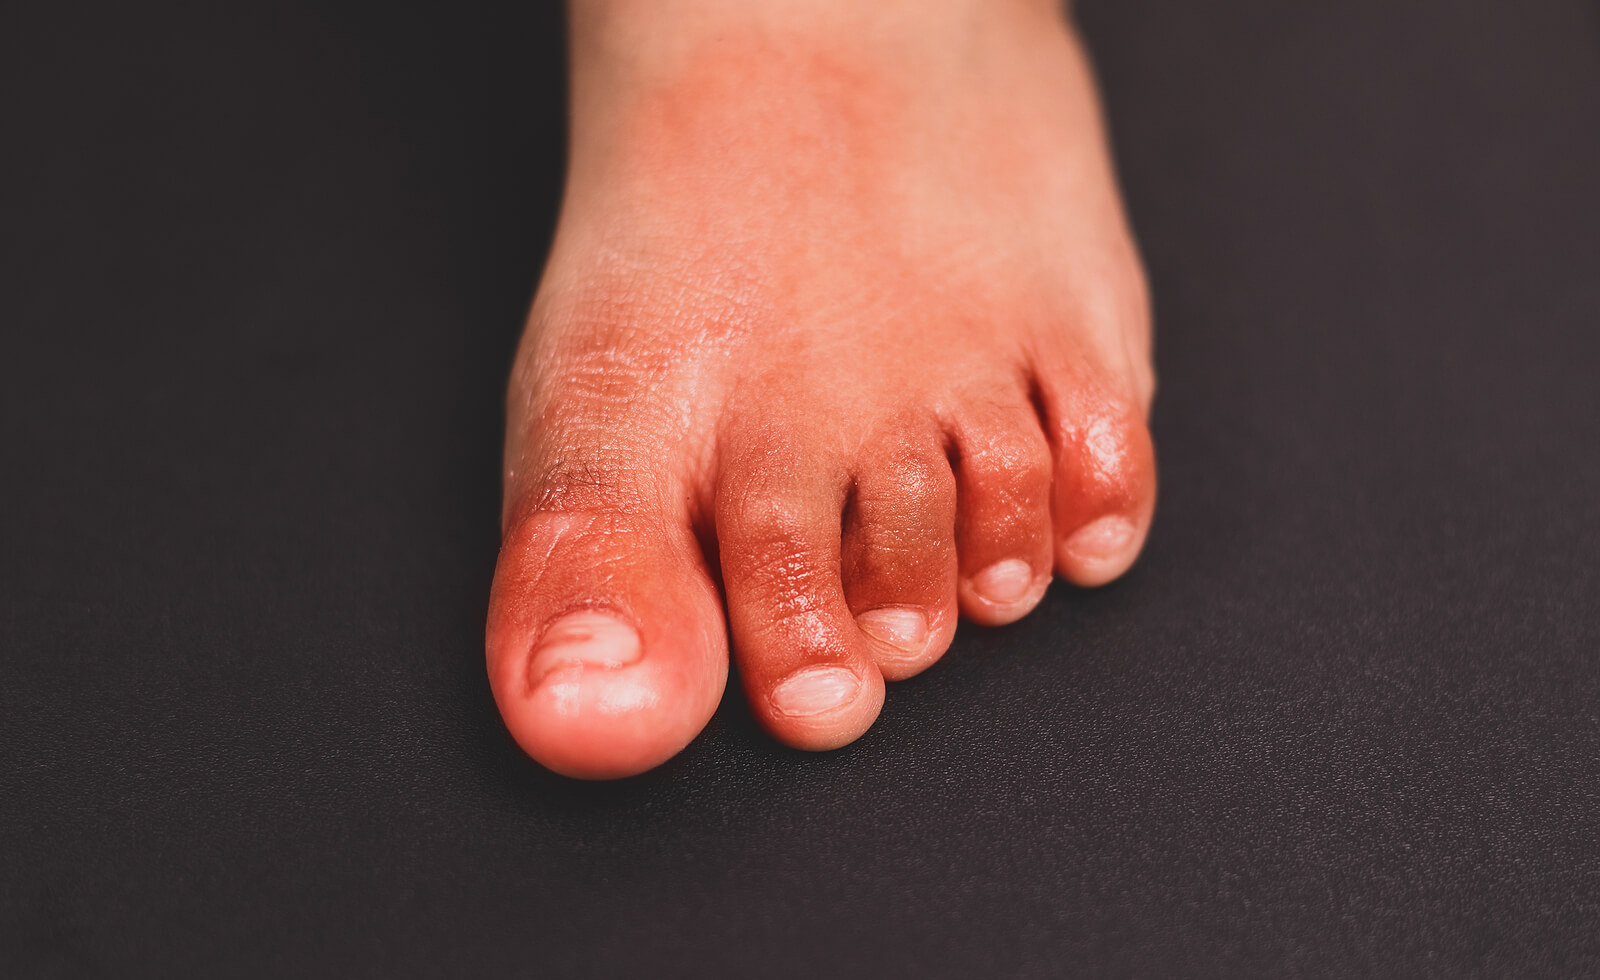 A child's foot with chilblains from the cold.